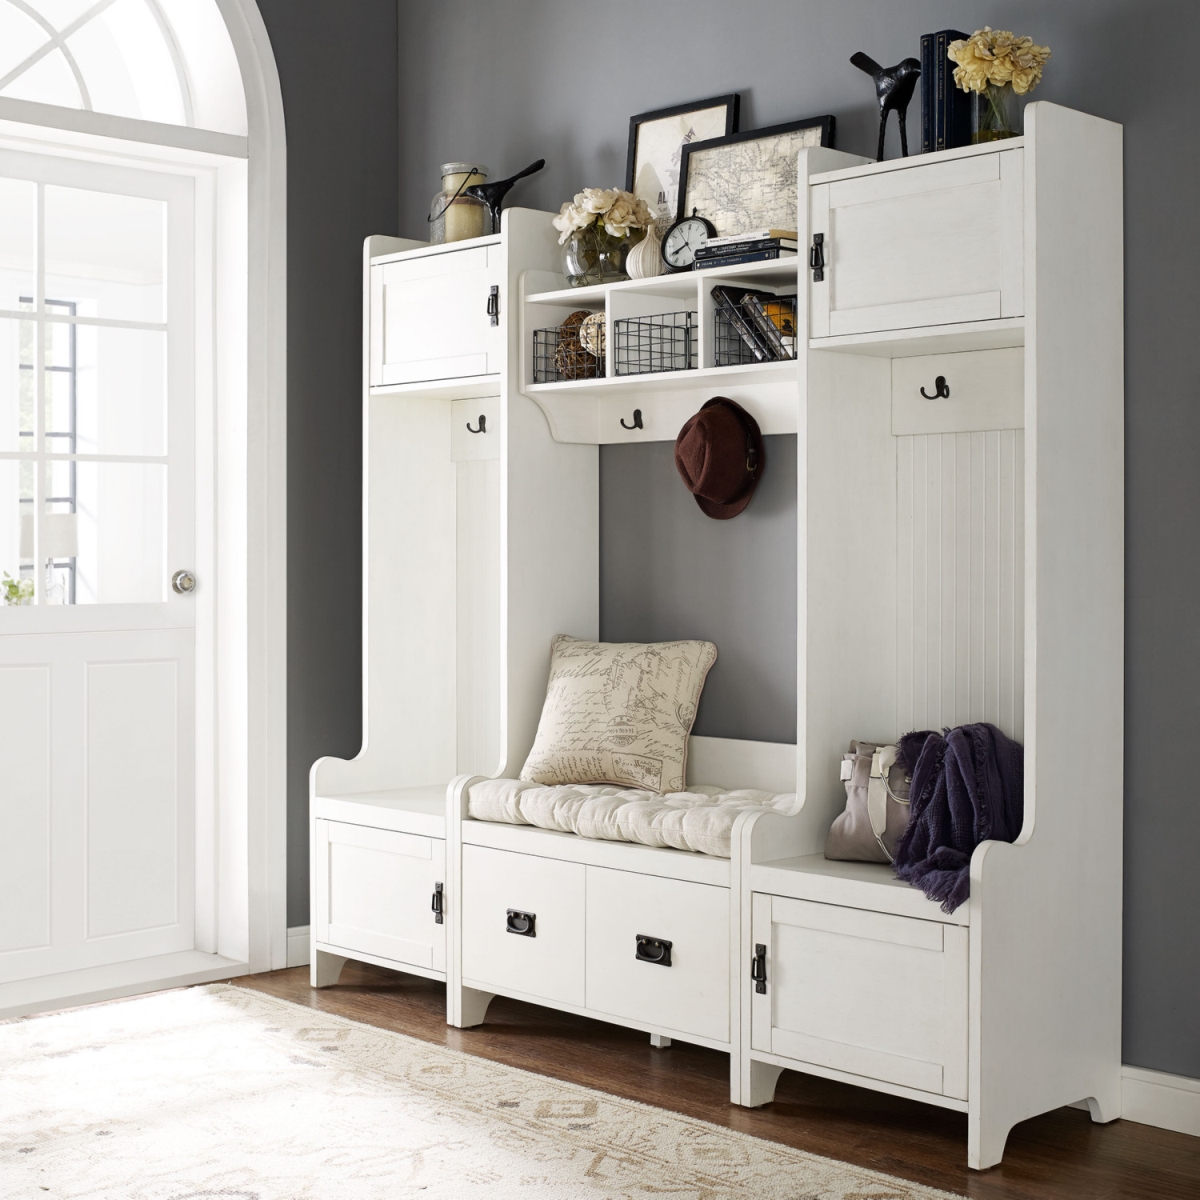 Picture of Crosley KF60006WH 4 Piece Fremont Entryway Kit - Two Towers, Bench, Shelf, Distressed White